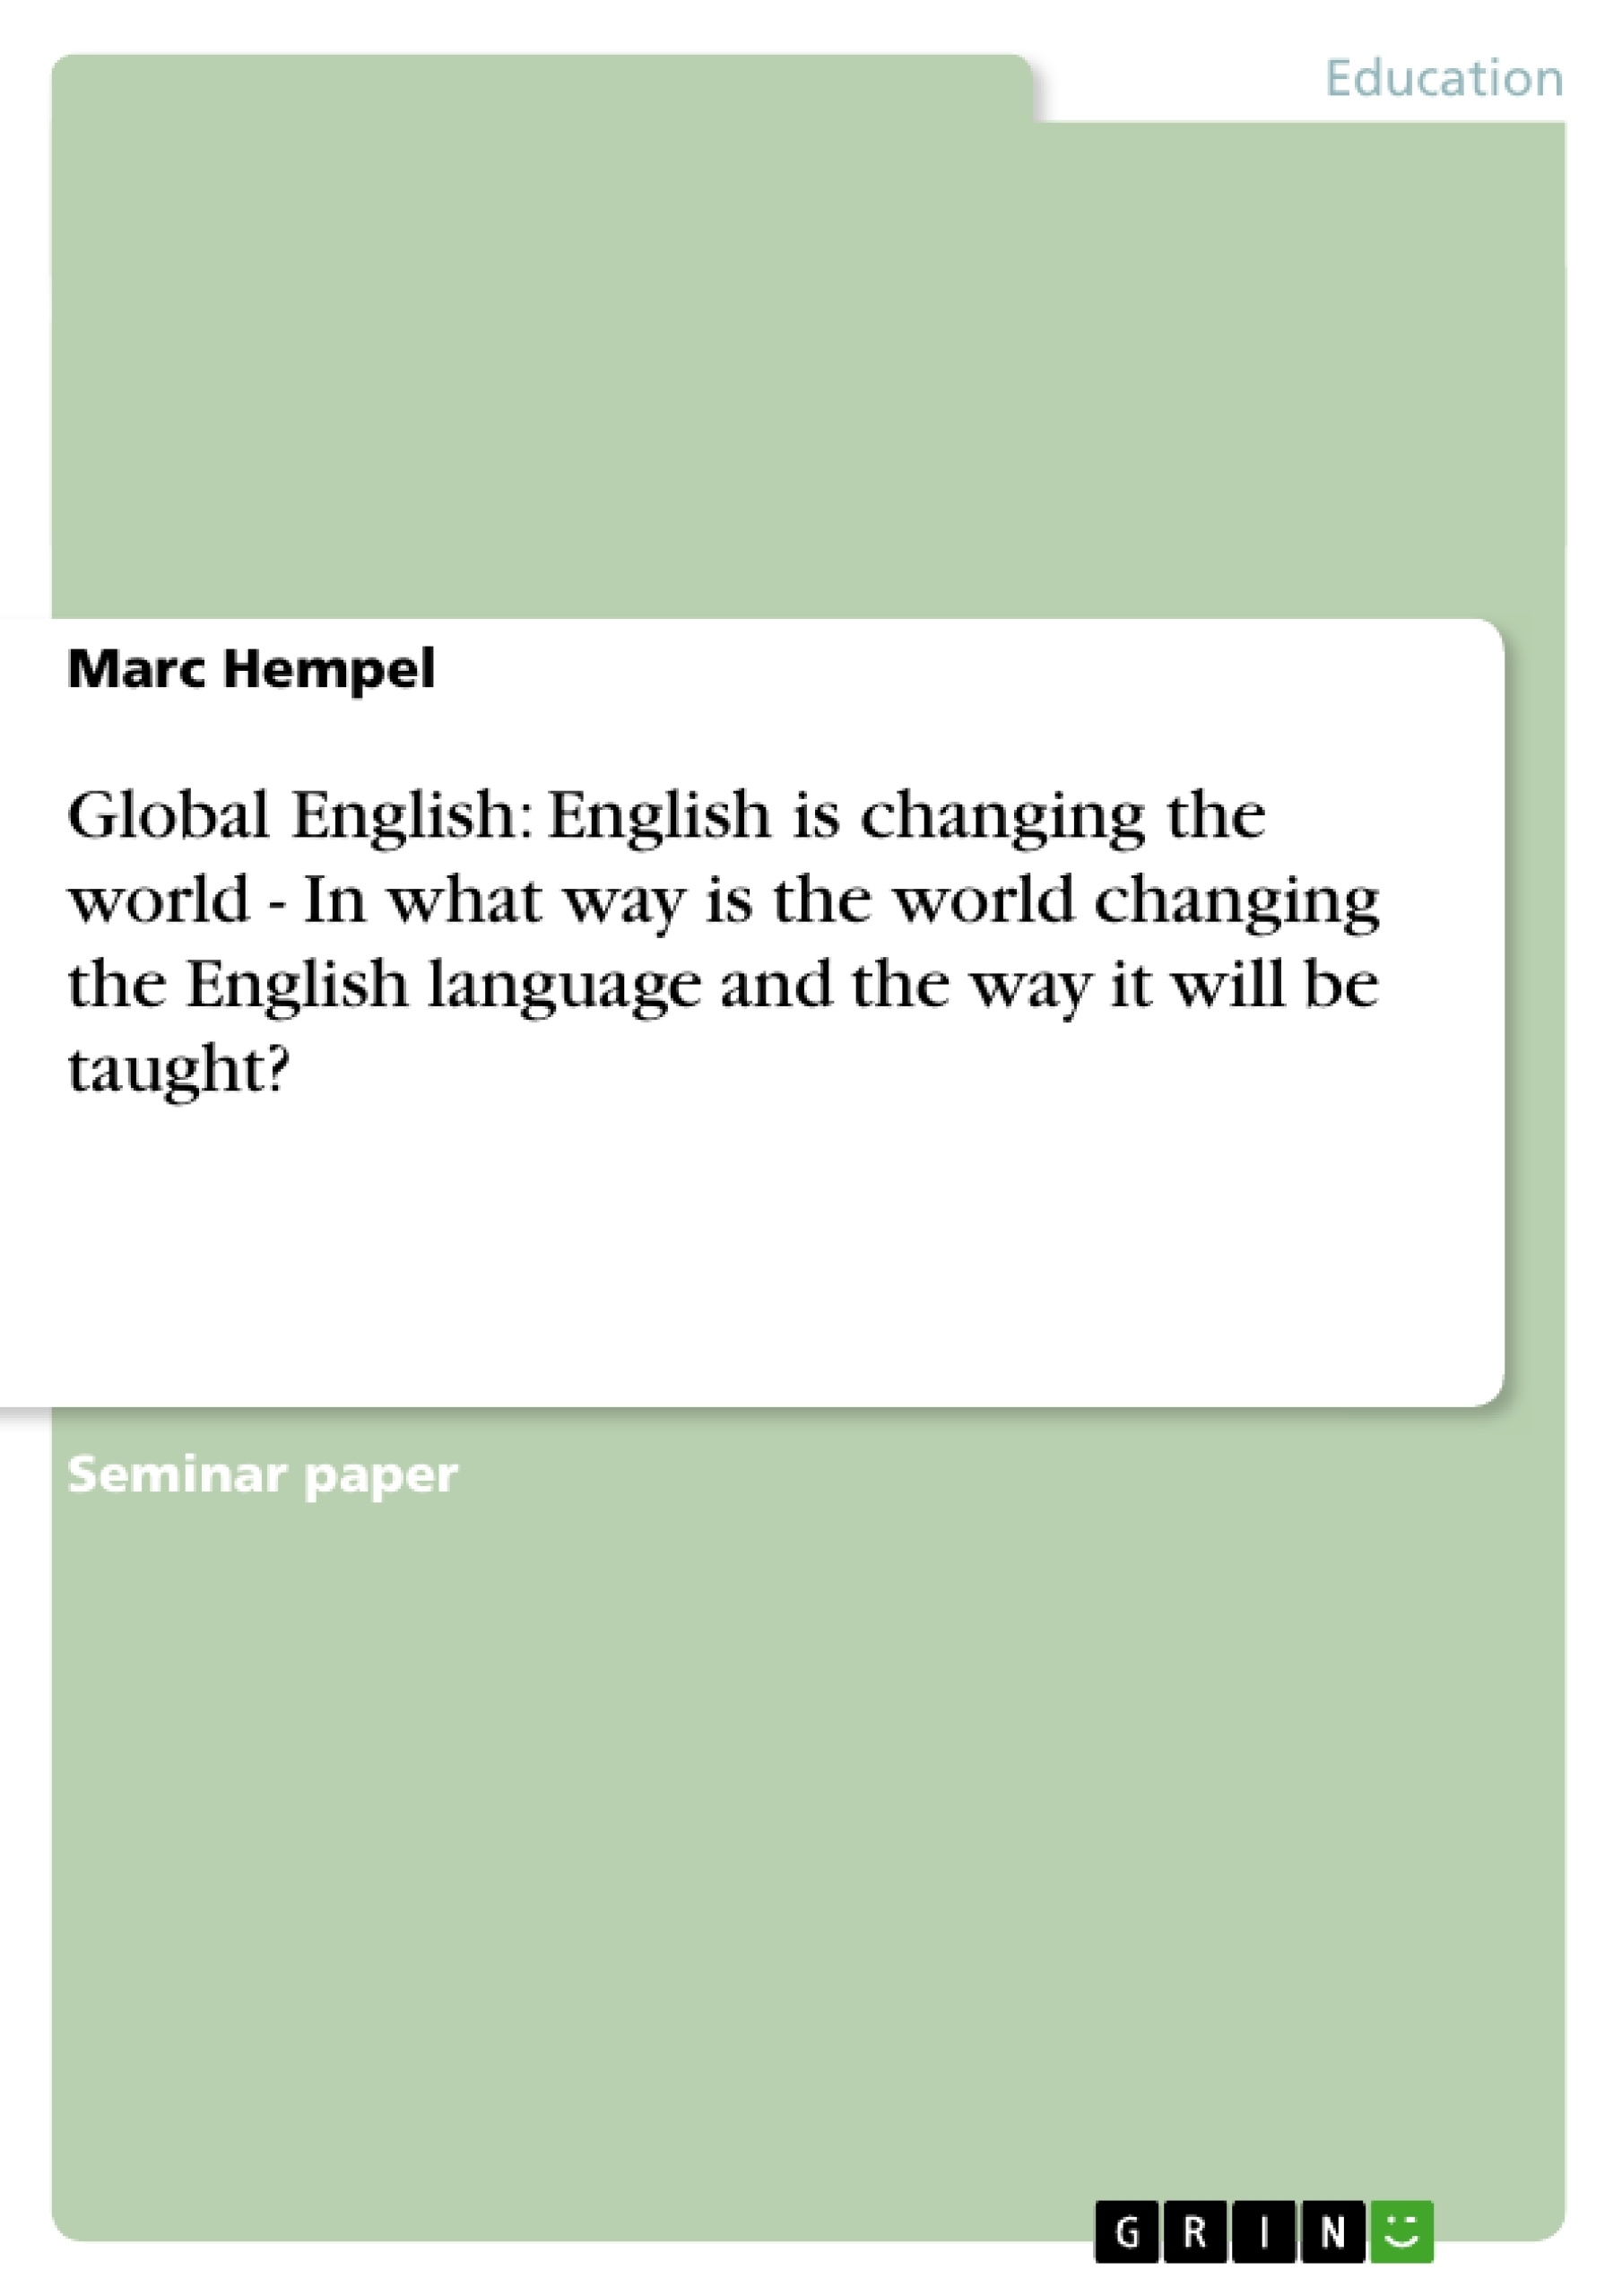 Title: Global English: English is changing the world - In what way is the world changing the English language and the way it will be taught?